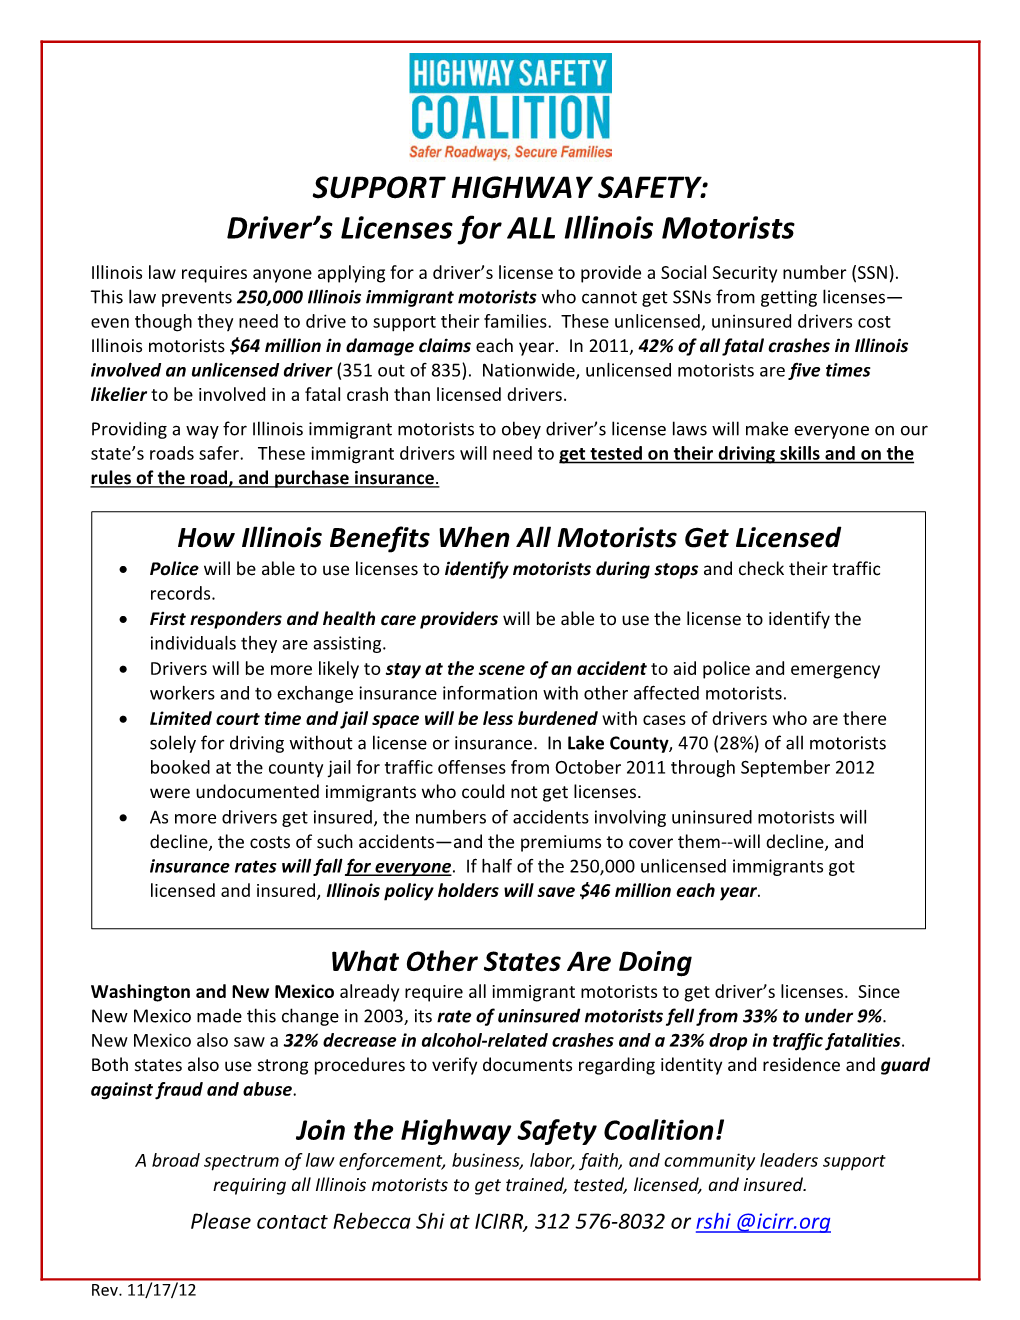 SUPPORT HIGHWAY SAFETY: Driver’S Licenses for ALL Illinois Motorists